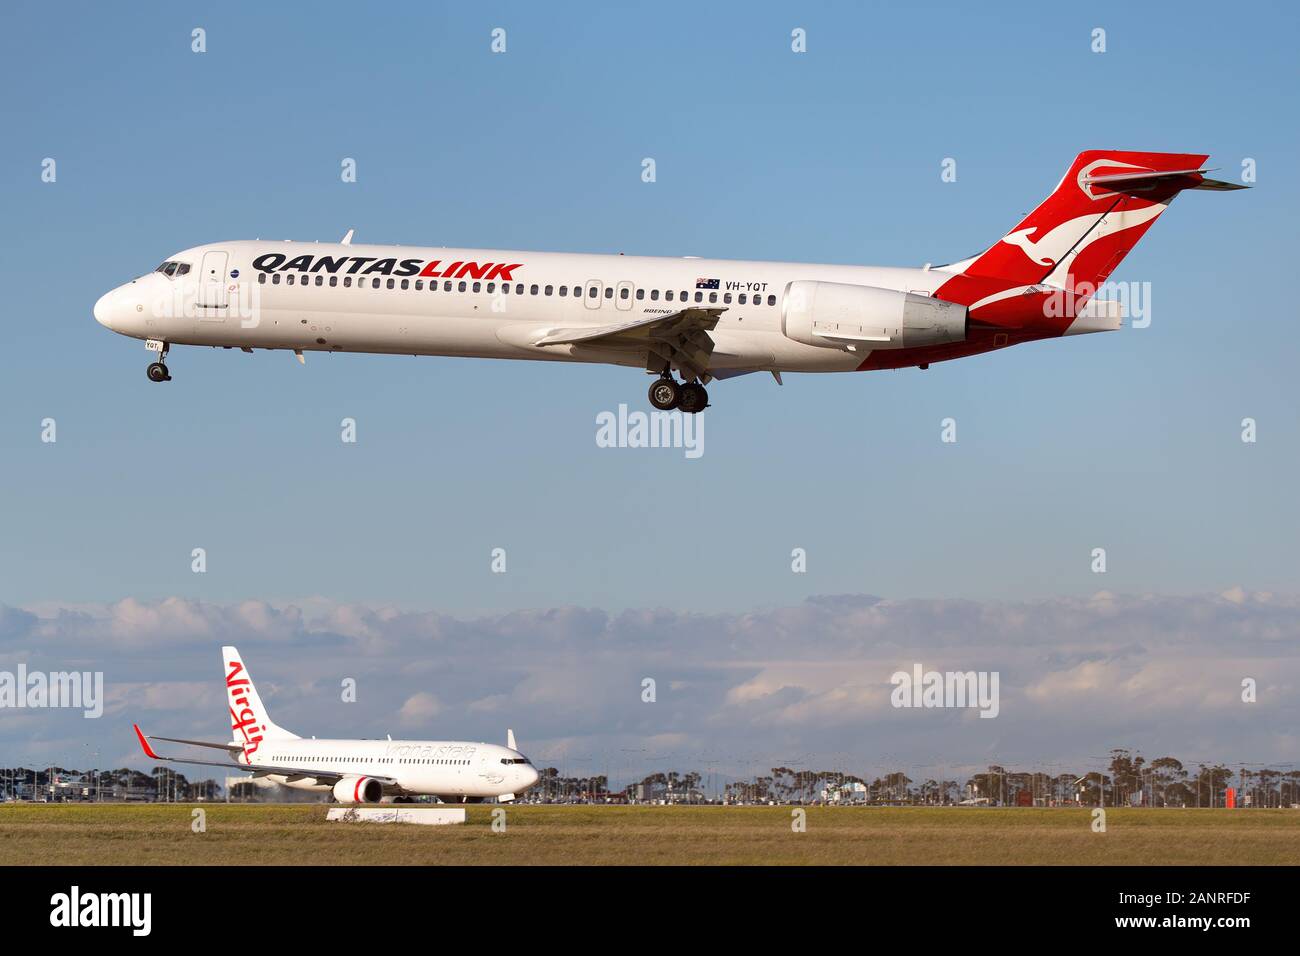 Boeing 717 regional airliner operated by QantasLink on approach to land at Melbourne Airport with a Virgin Boeing 737 taxiing in the background. Stock Photo